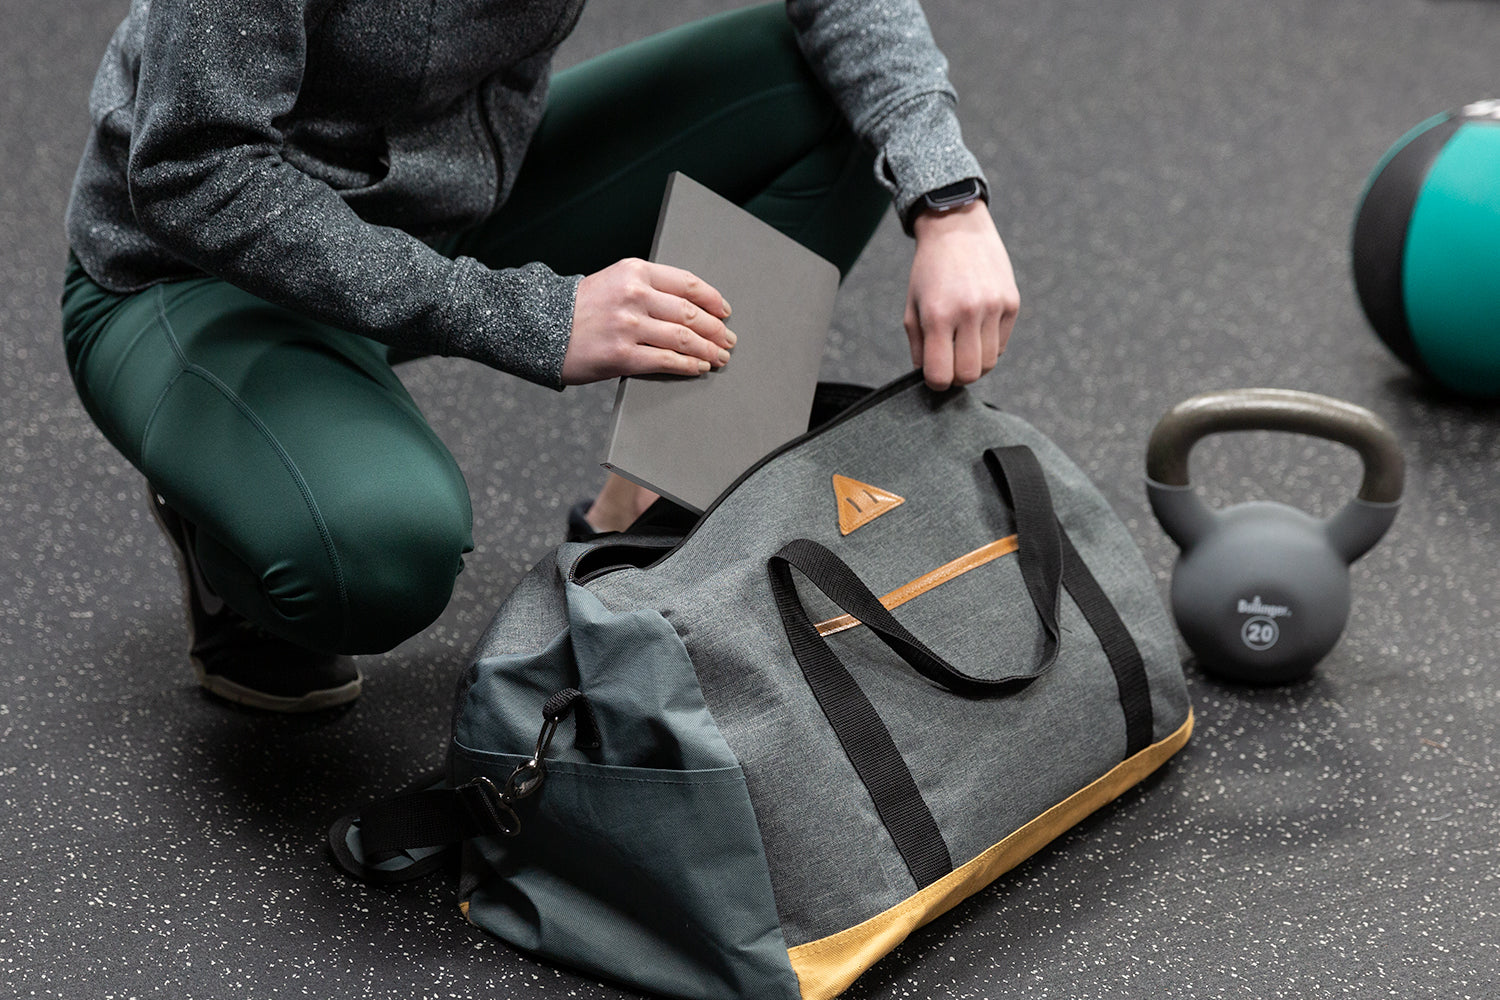 A woman in workout clothes puts a grey fitness journal into a grey gym bag.